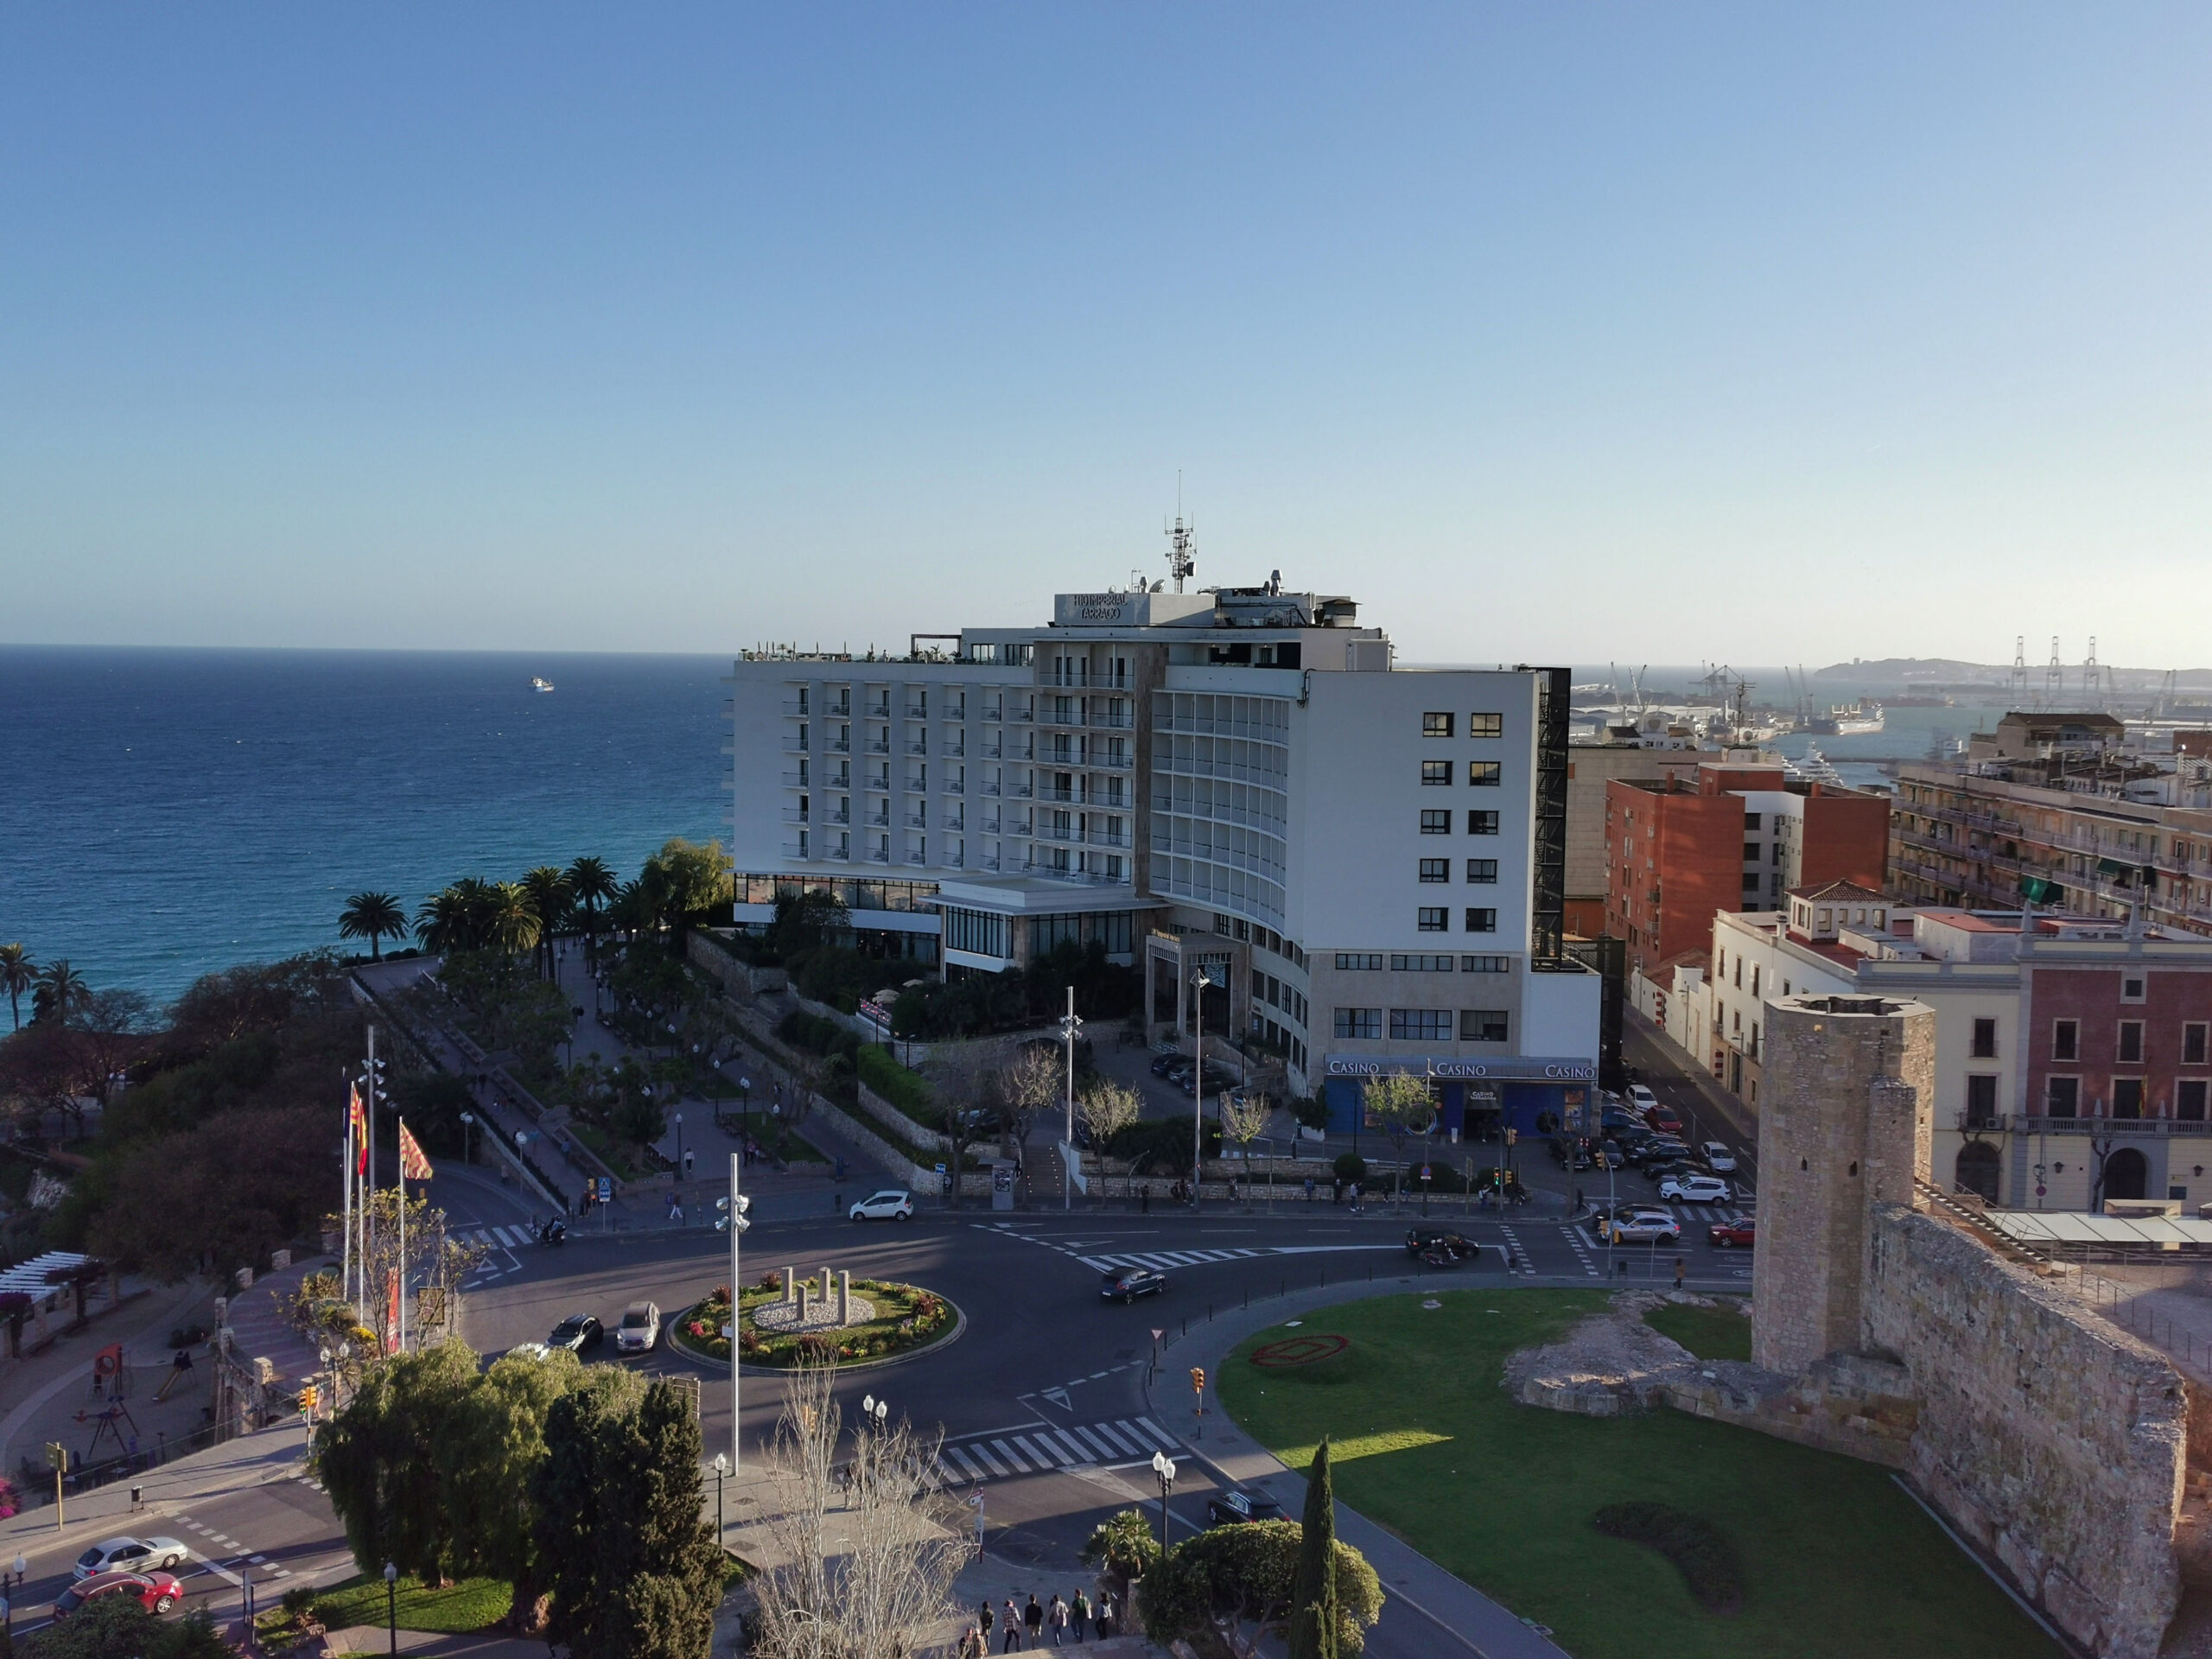 H10 Imperial Tarraco In Tarragona, Hotel Review, Spain, Costa Dorada, Jet2holidays Travels, Jet2holidays, Family Packages, Hotel Visit, H10 Hotels, Coastal Staycation, Press Trip, Tarragona, The Frenchie Mummy